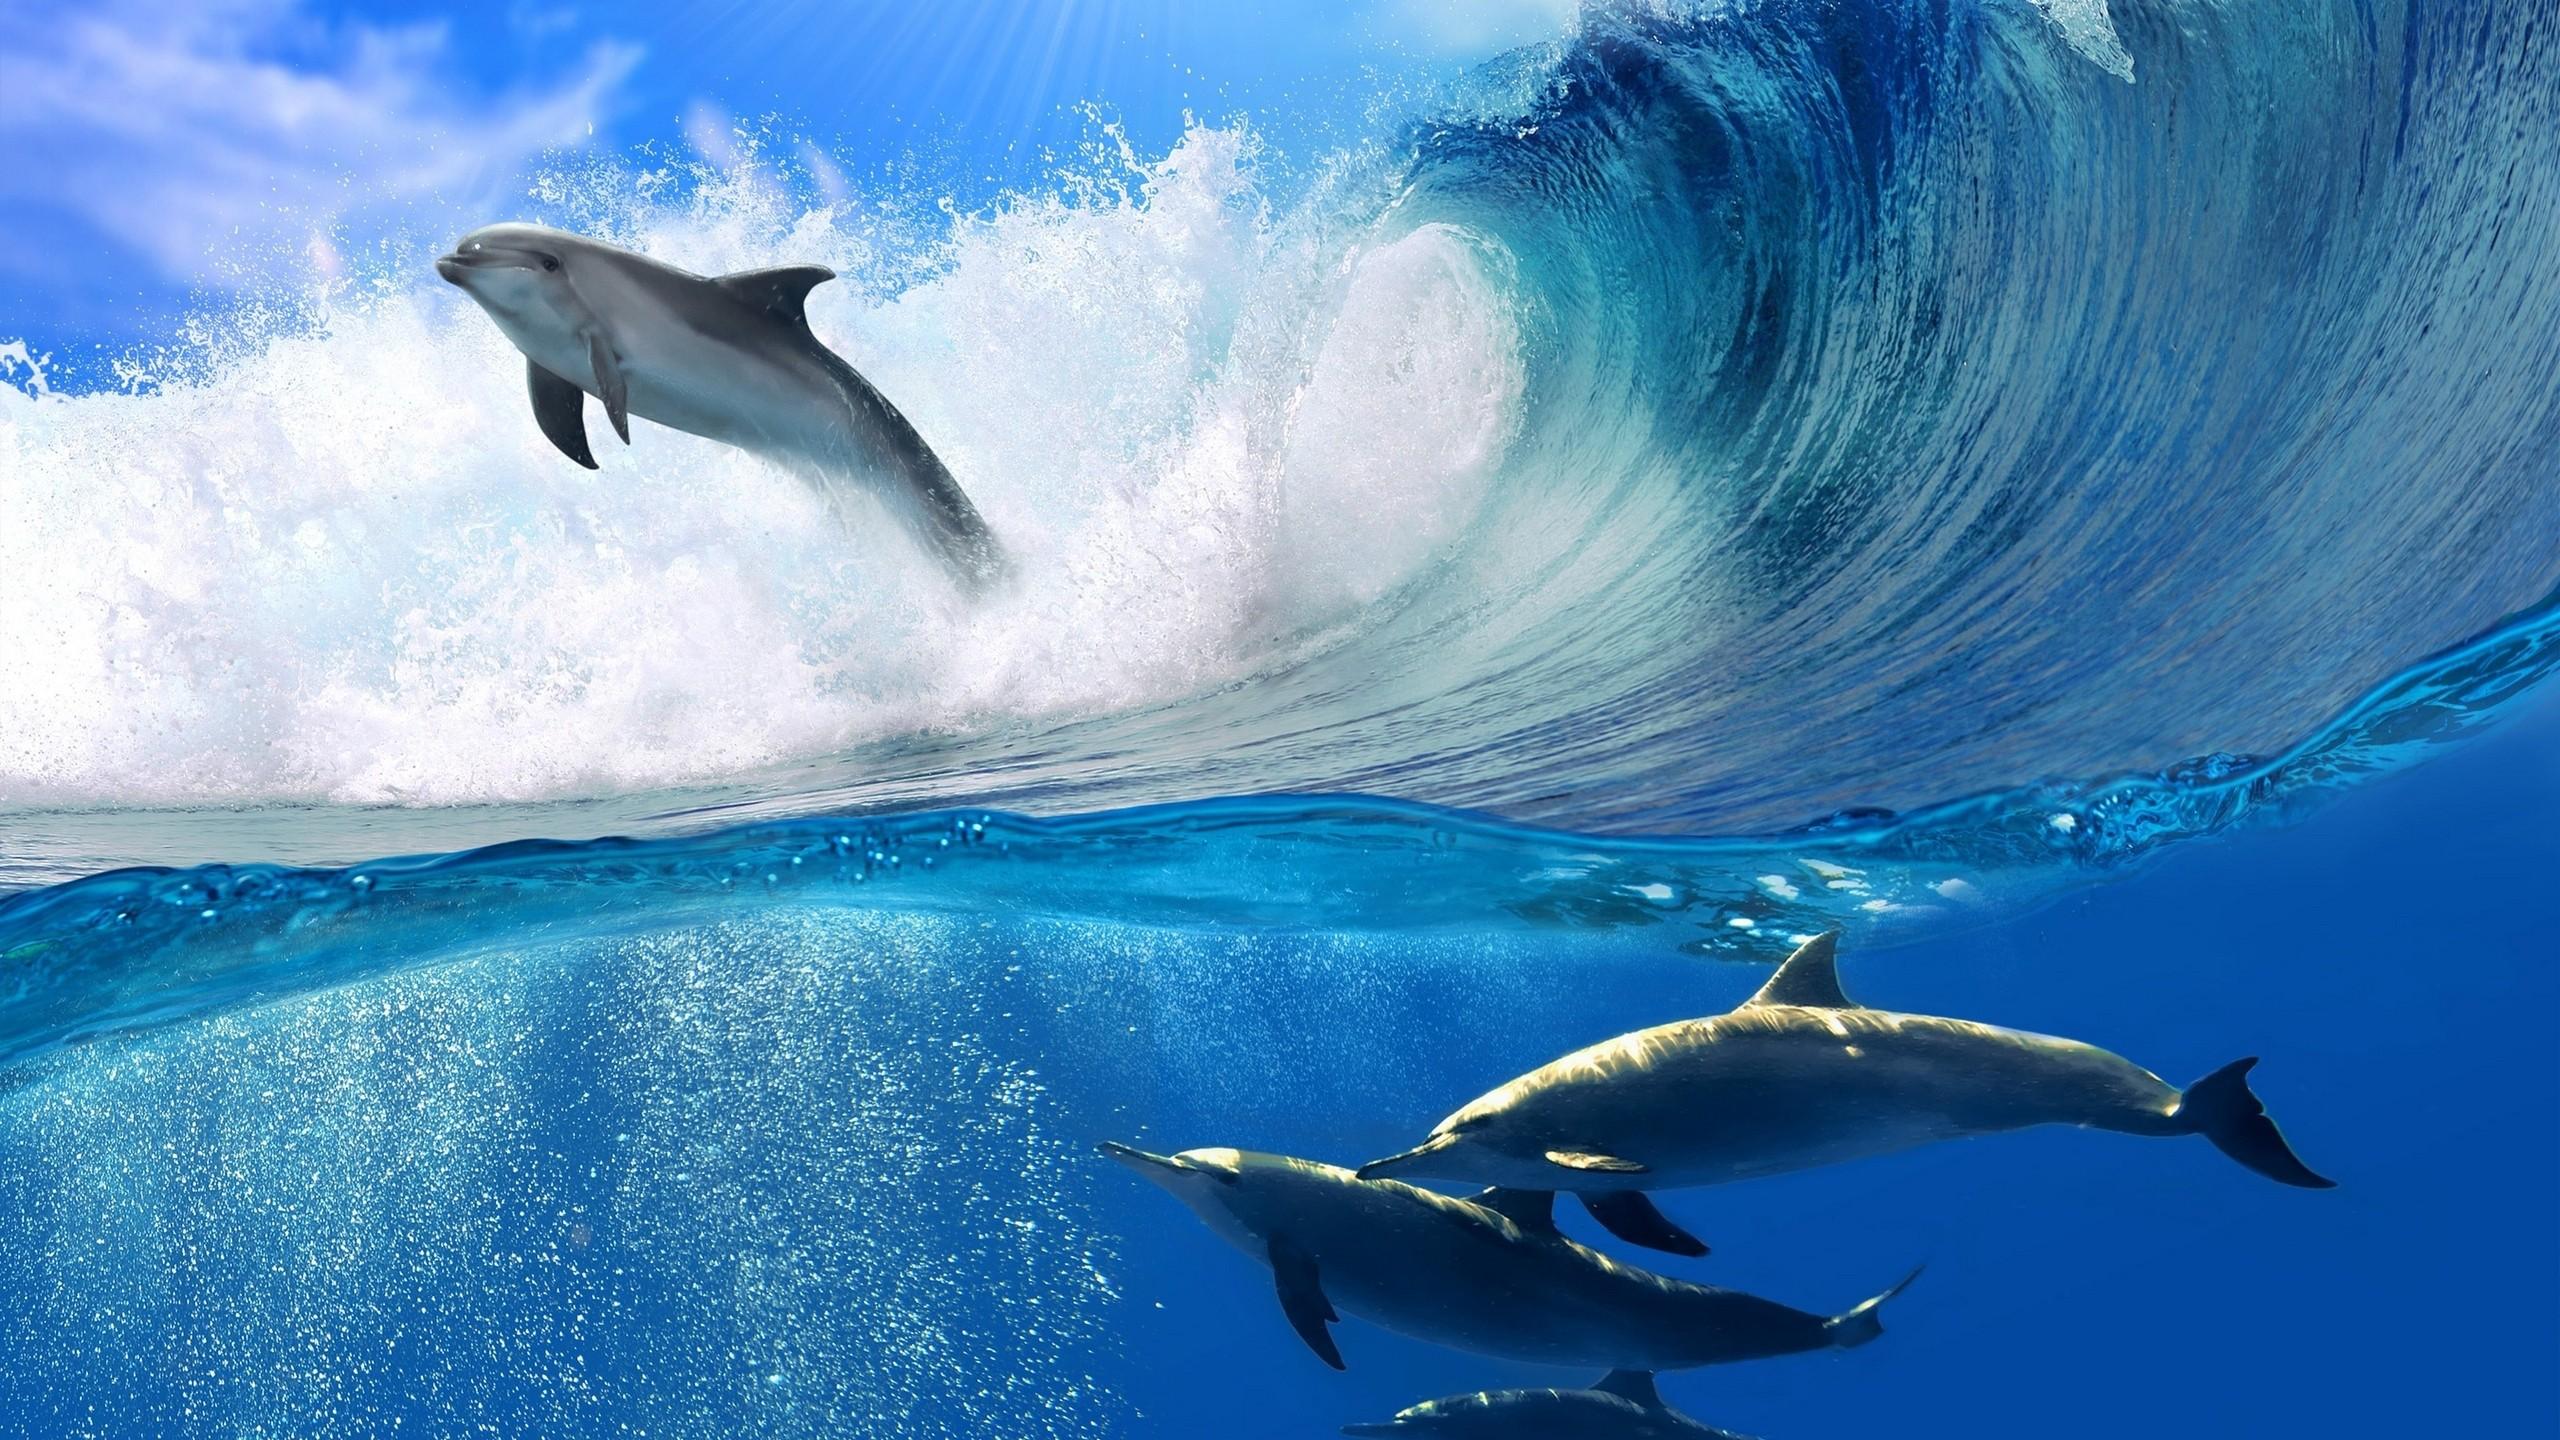 Dolphin jump wallpaper and image, picture, photo